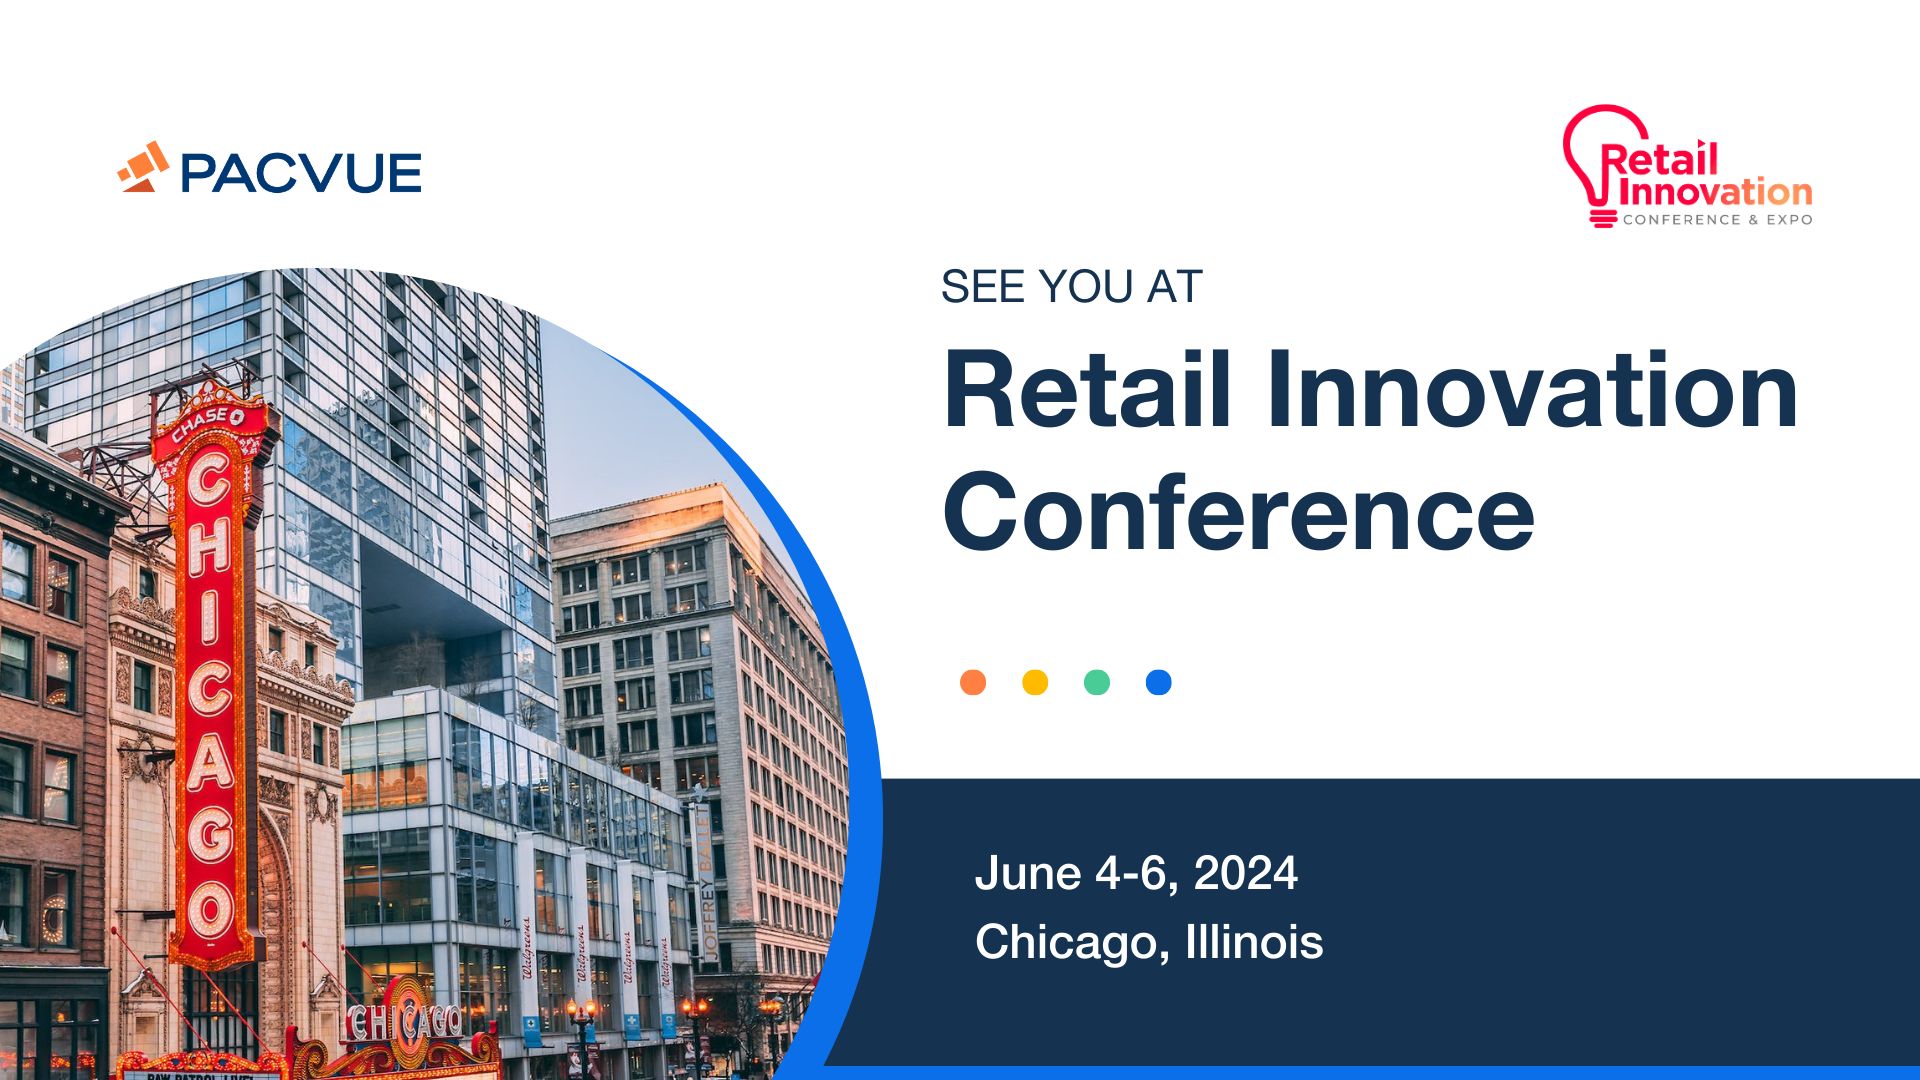 Retail Innovation Conference 2024